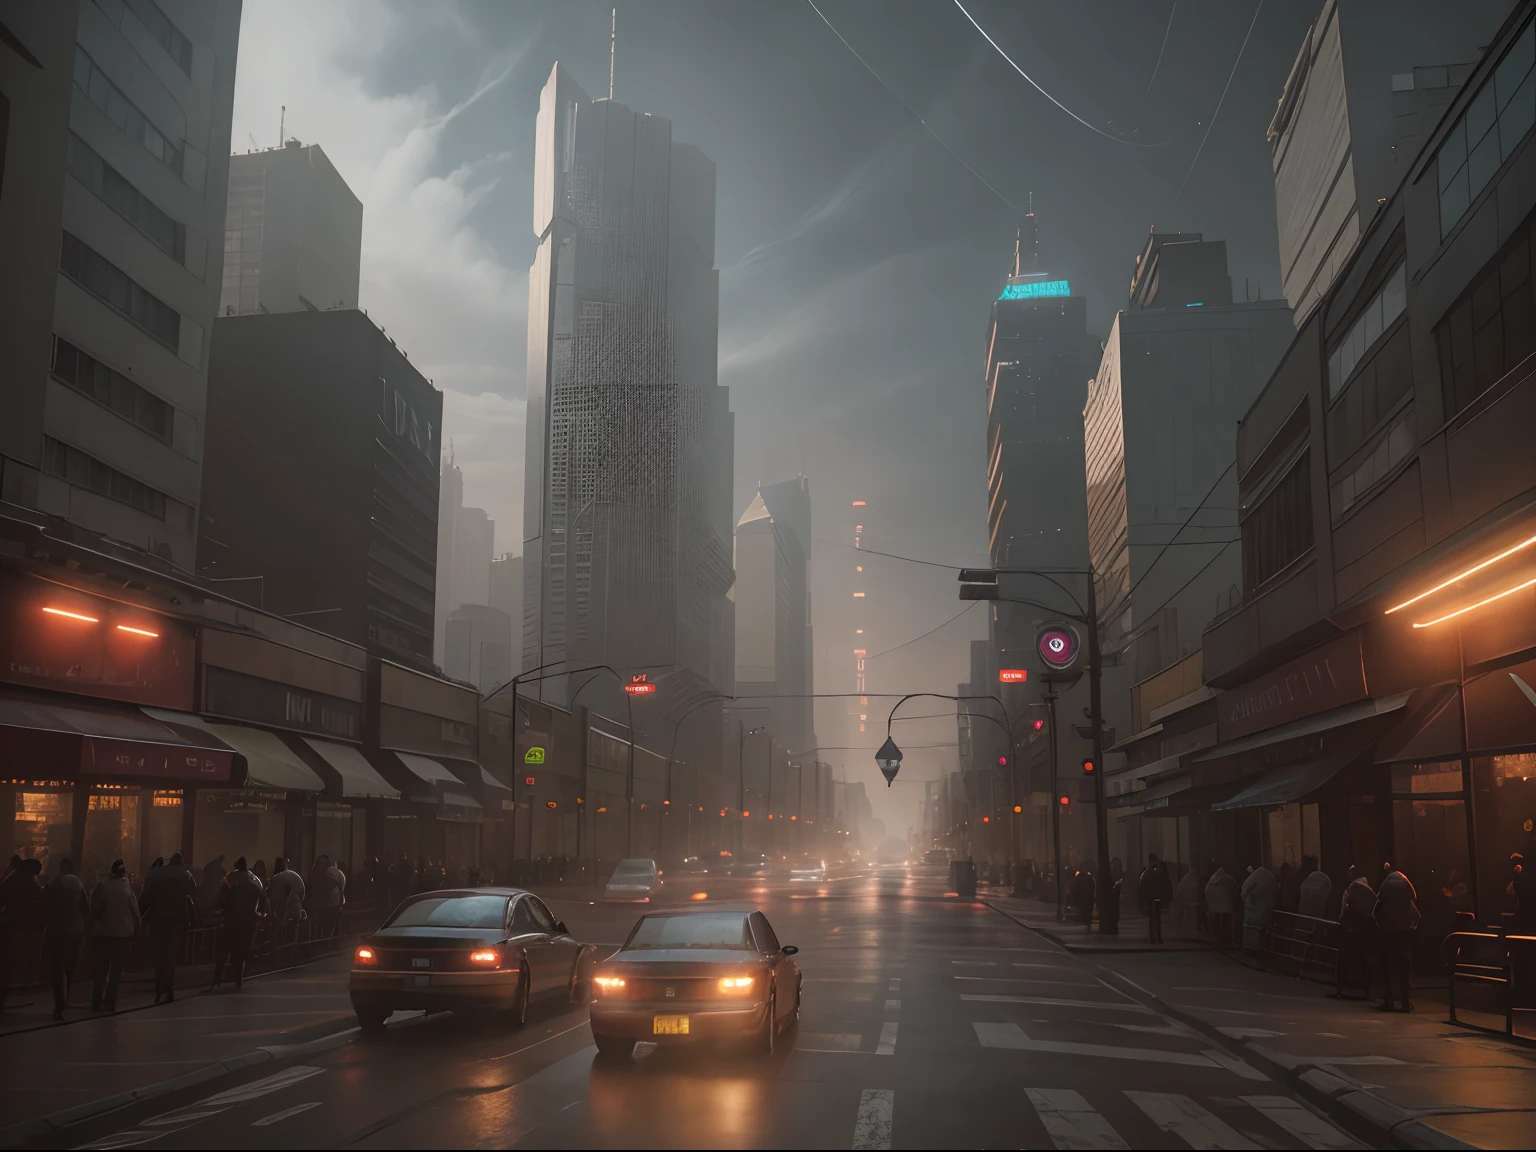 Cyberpunk cityscape street scene with towering skyscrapers, glowing neon signs and LED lights, traffic and ((flying cars)) in the sky, dark atmosphere, cinematic lighting.